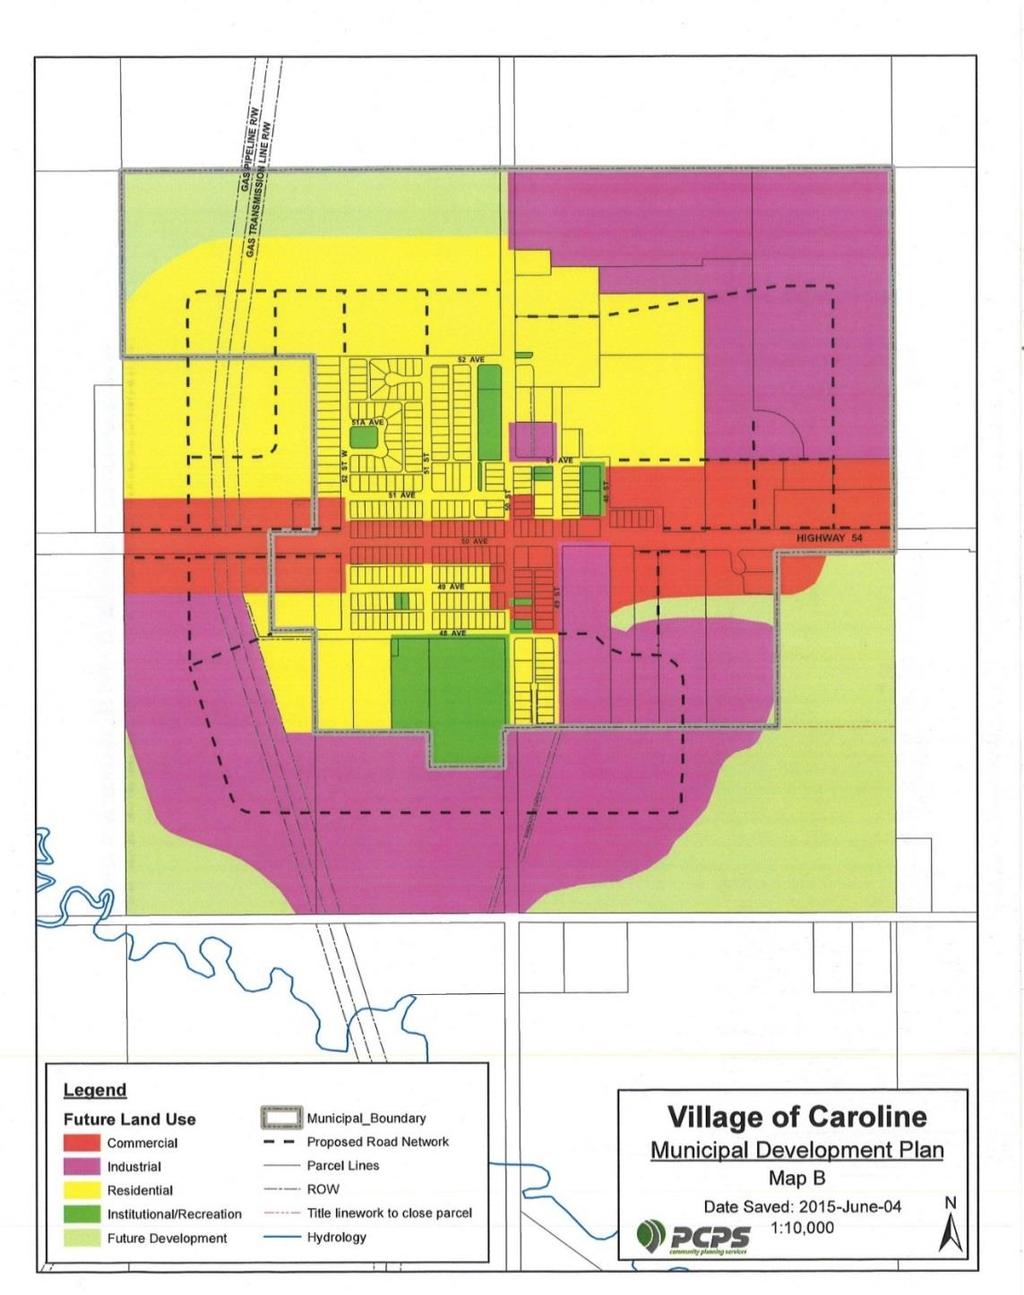 VILLAGE OF CAROLINE MUNICIPAL DEVELOPMENT PLAN The Village of Caroline adopted a Municipal Development Plan in 1998 to establish priorities for the Village and a land use concept map.